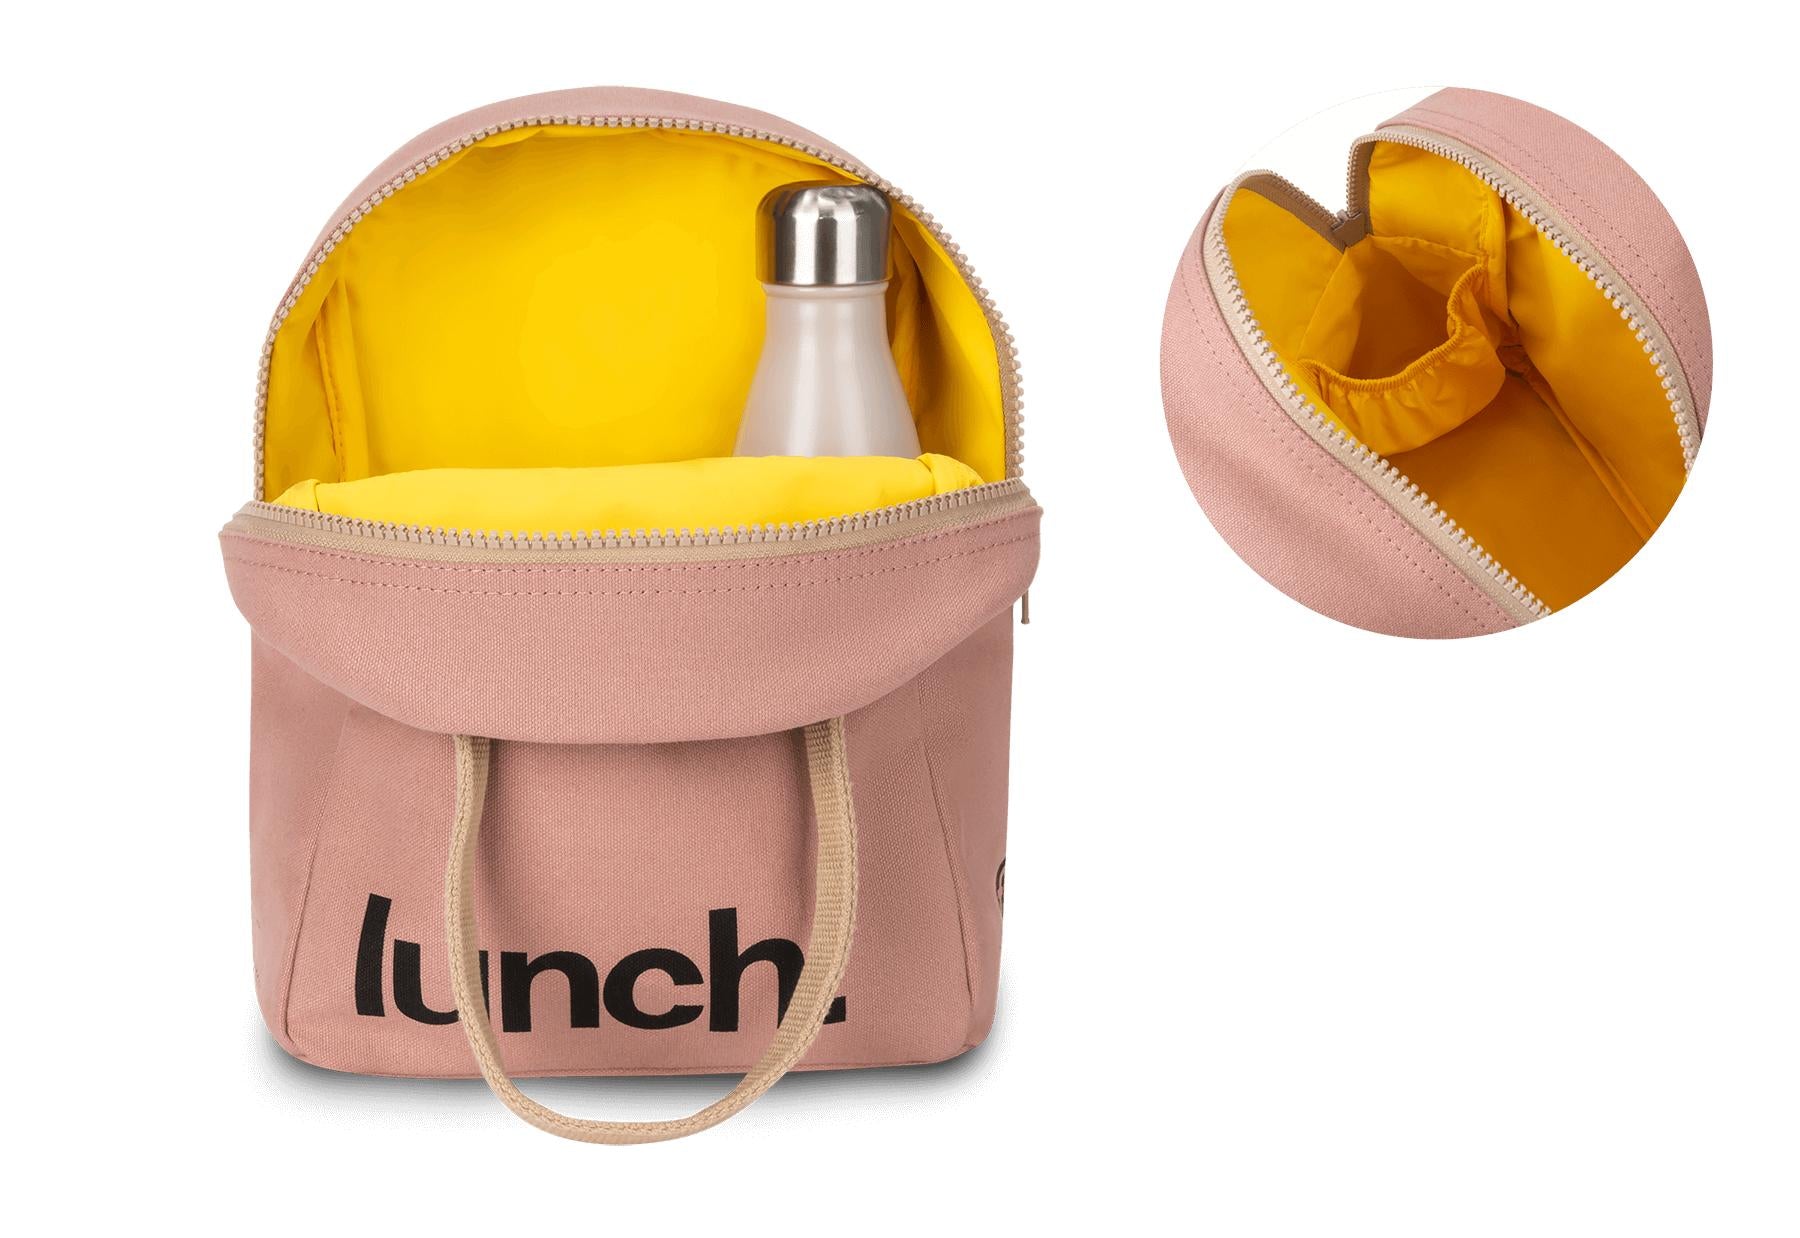 Zipper Lunch - 'Lunch' Vintage Rose